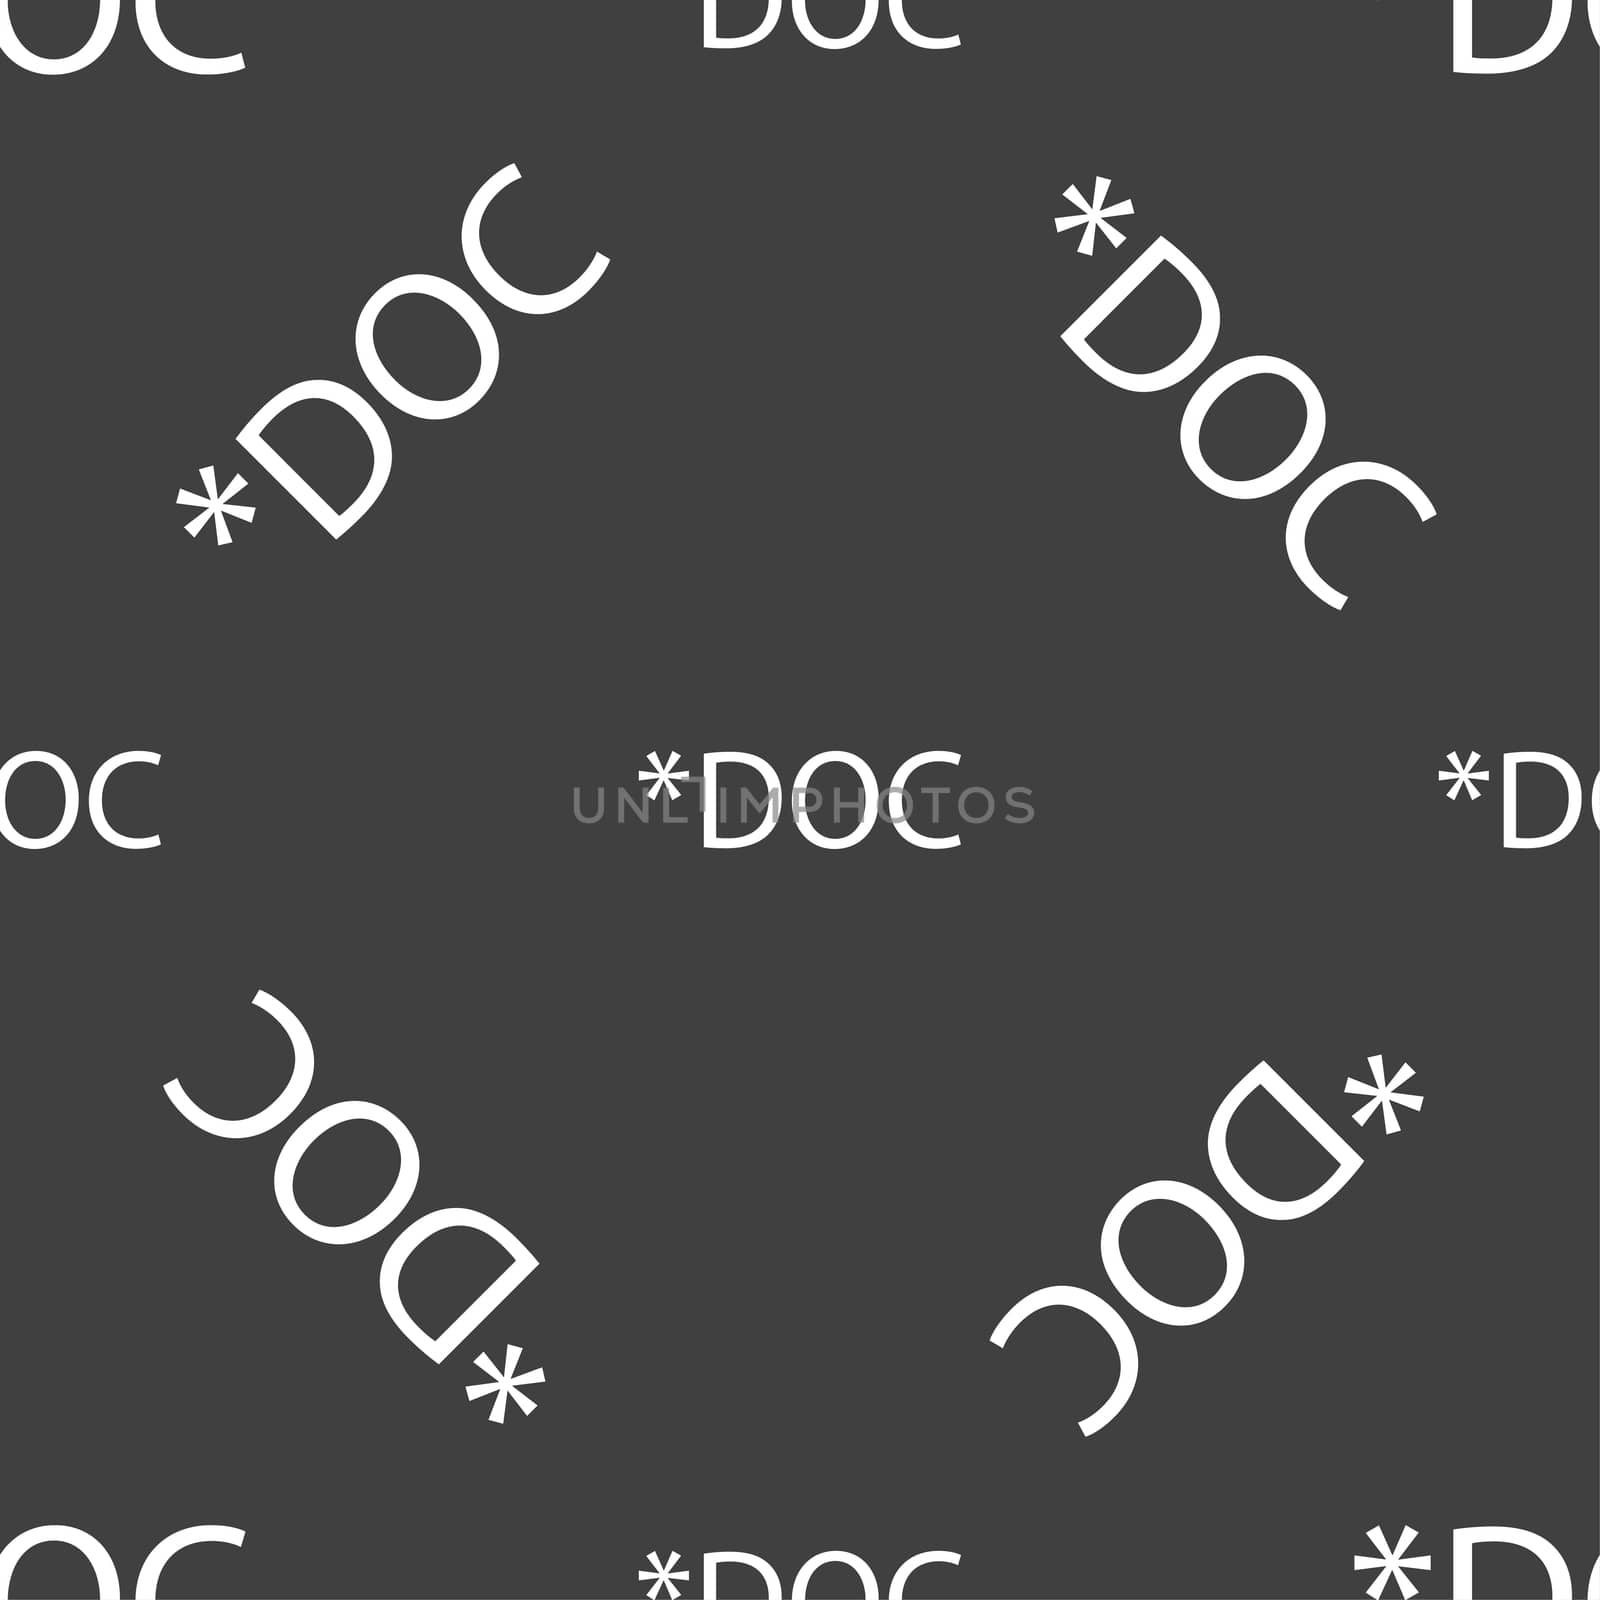 File document icon. Download doc button. Doc file extension symbol. Seamless pattern on a gray background.  by serhii_lohvyniuk